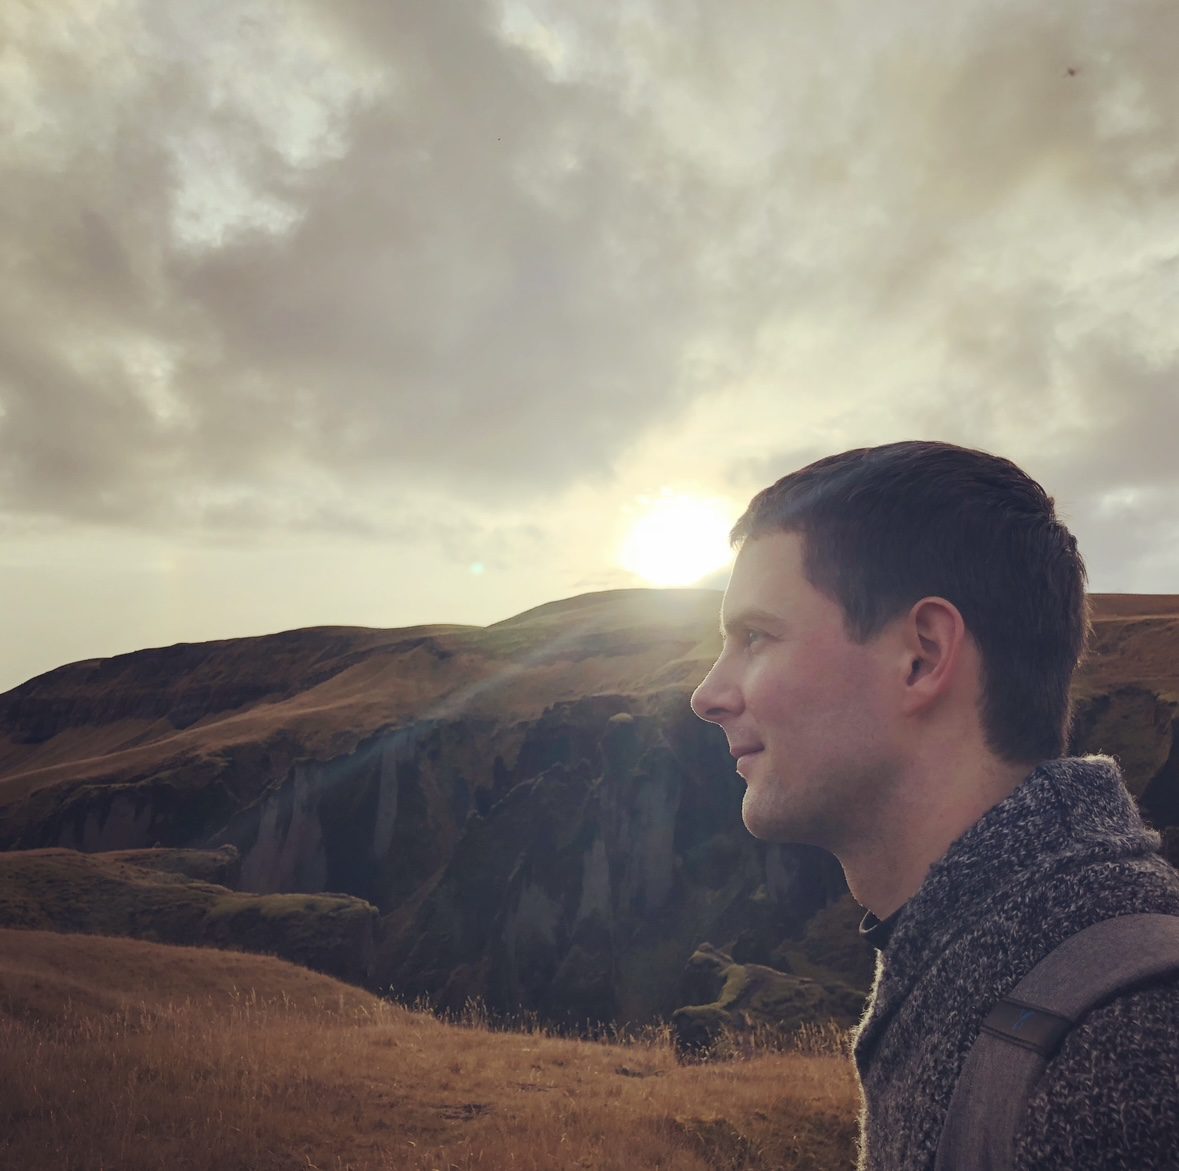 Tom hiking in Iceland